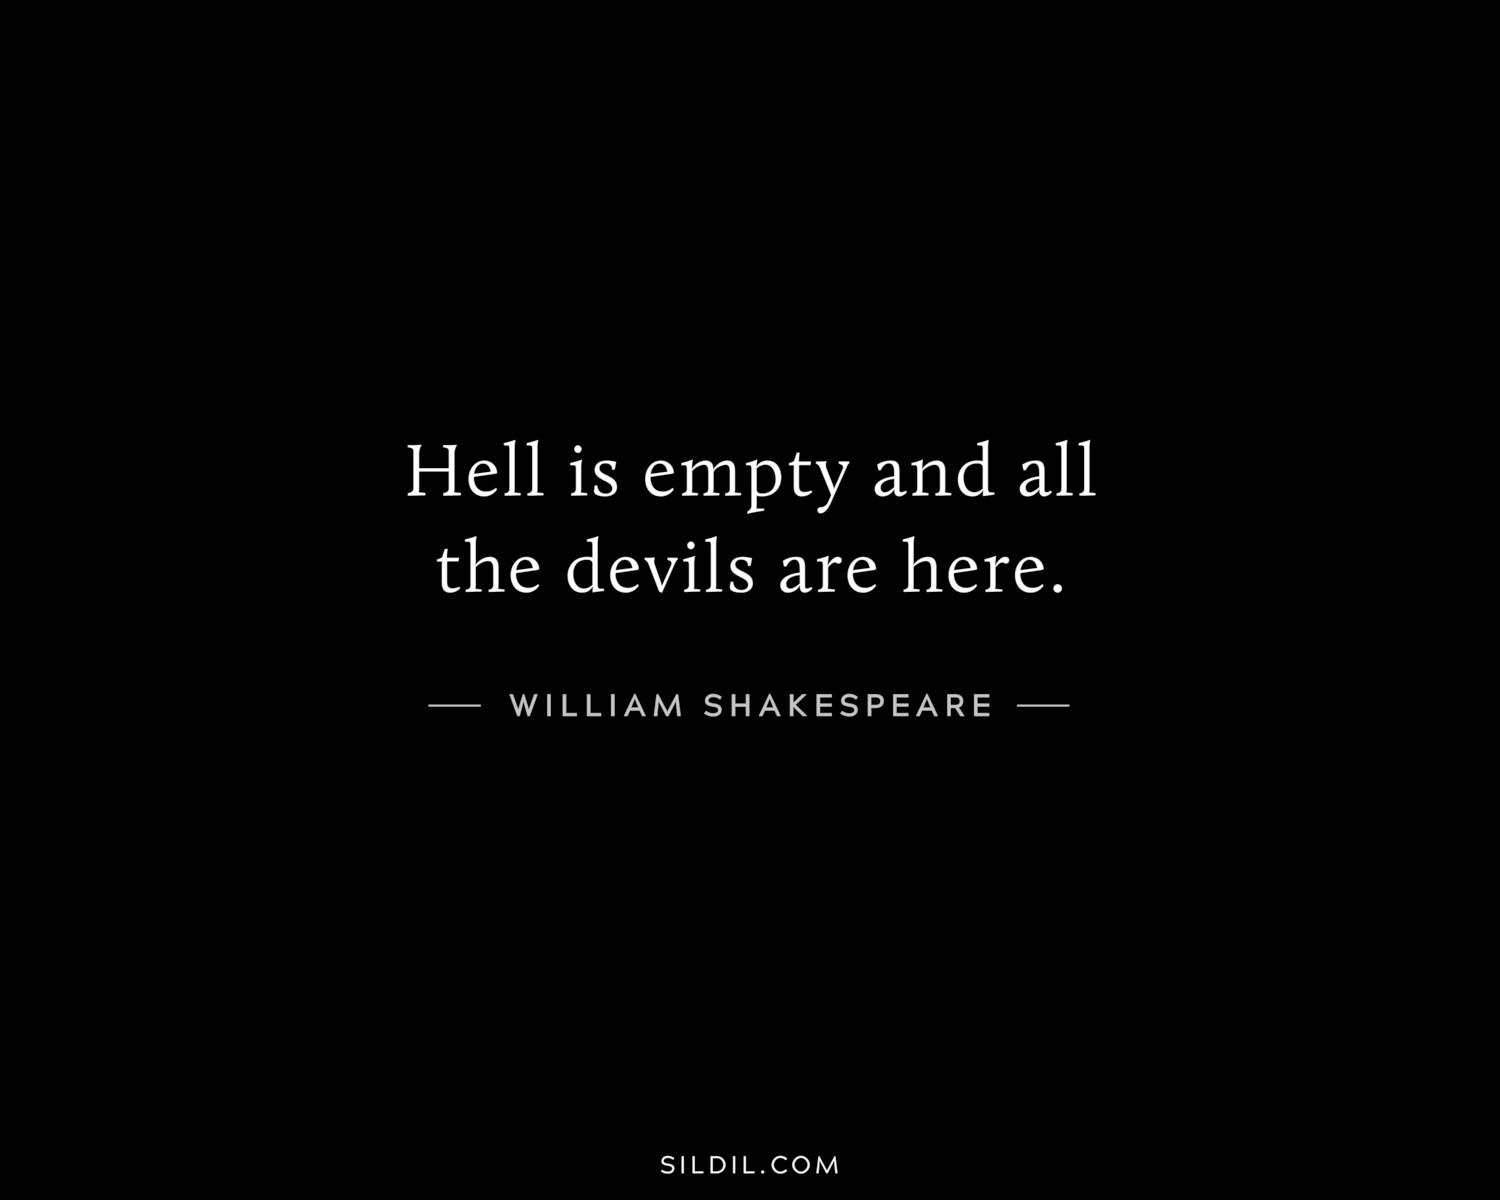 Hell is empty and all the devils are here.